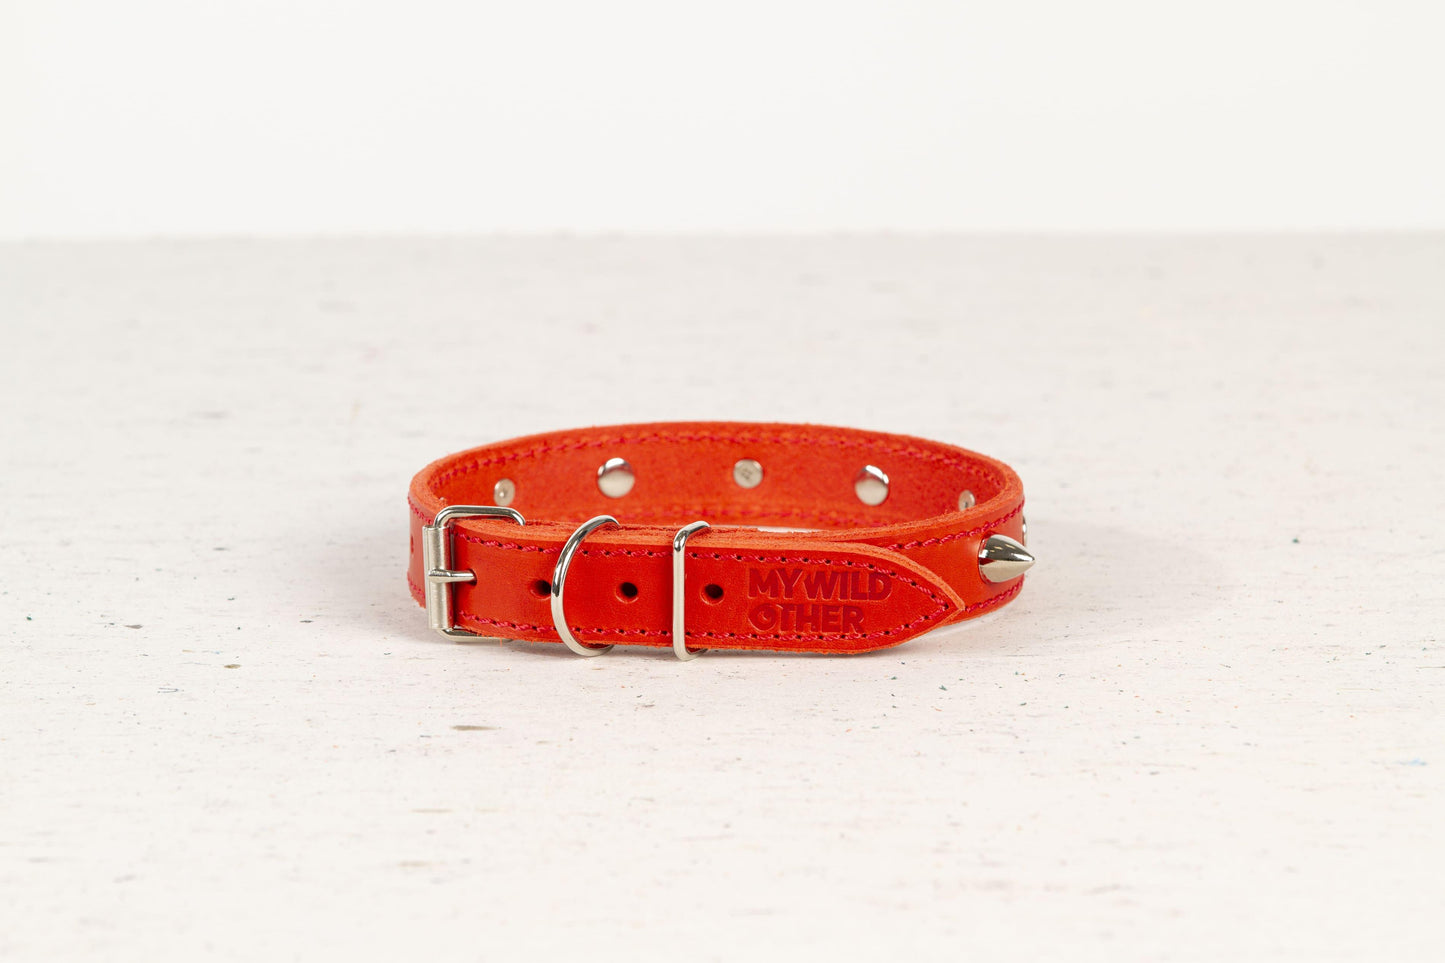 Handmade red leather STUDDED dog collar - premium dog goods handmade in Europe by My Wild Other